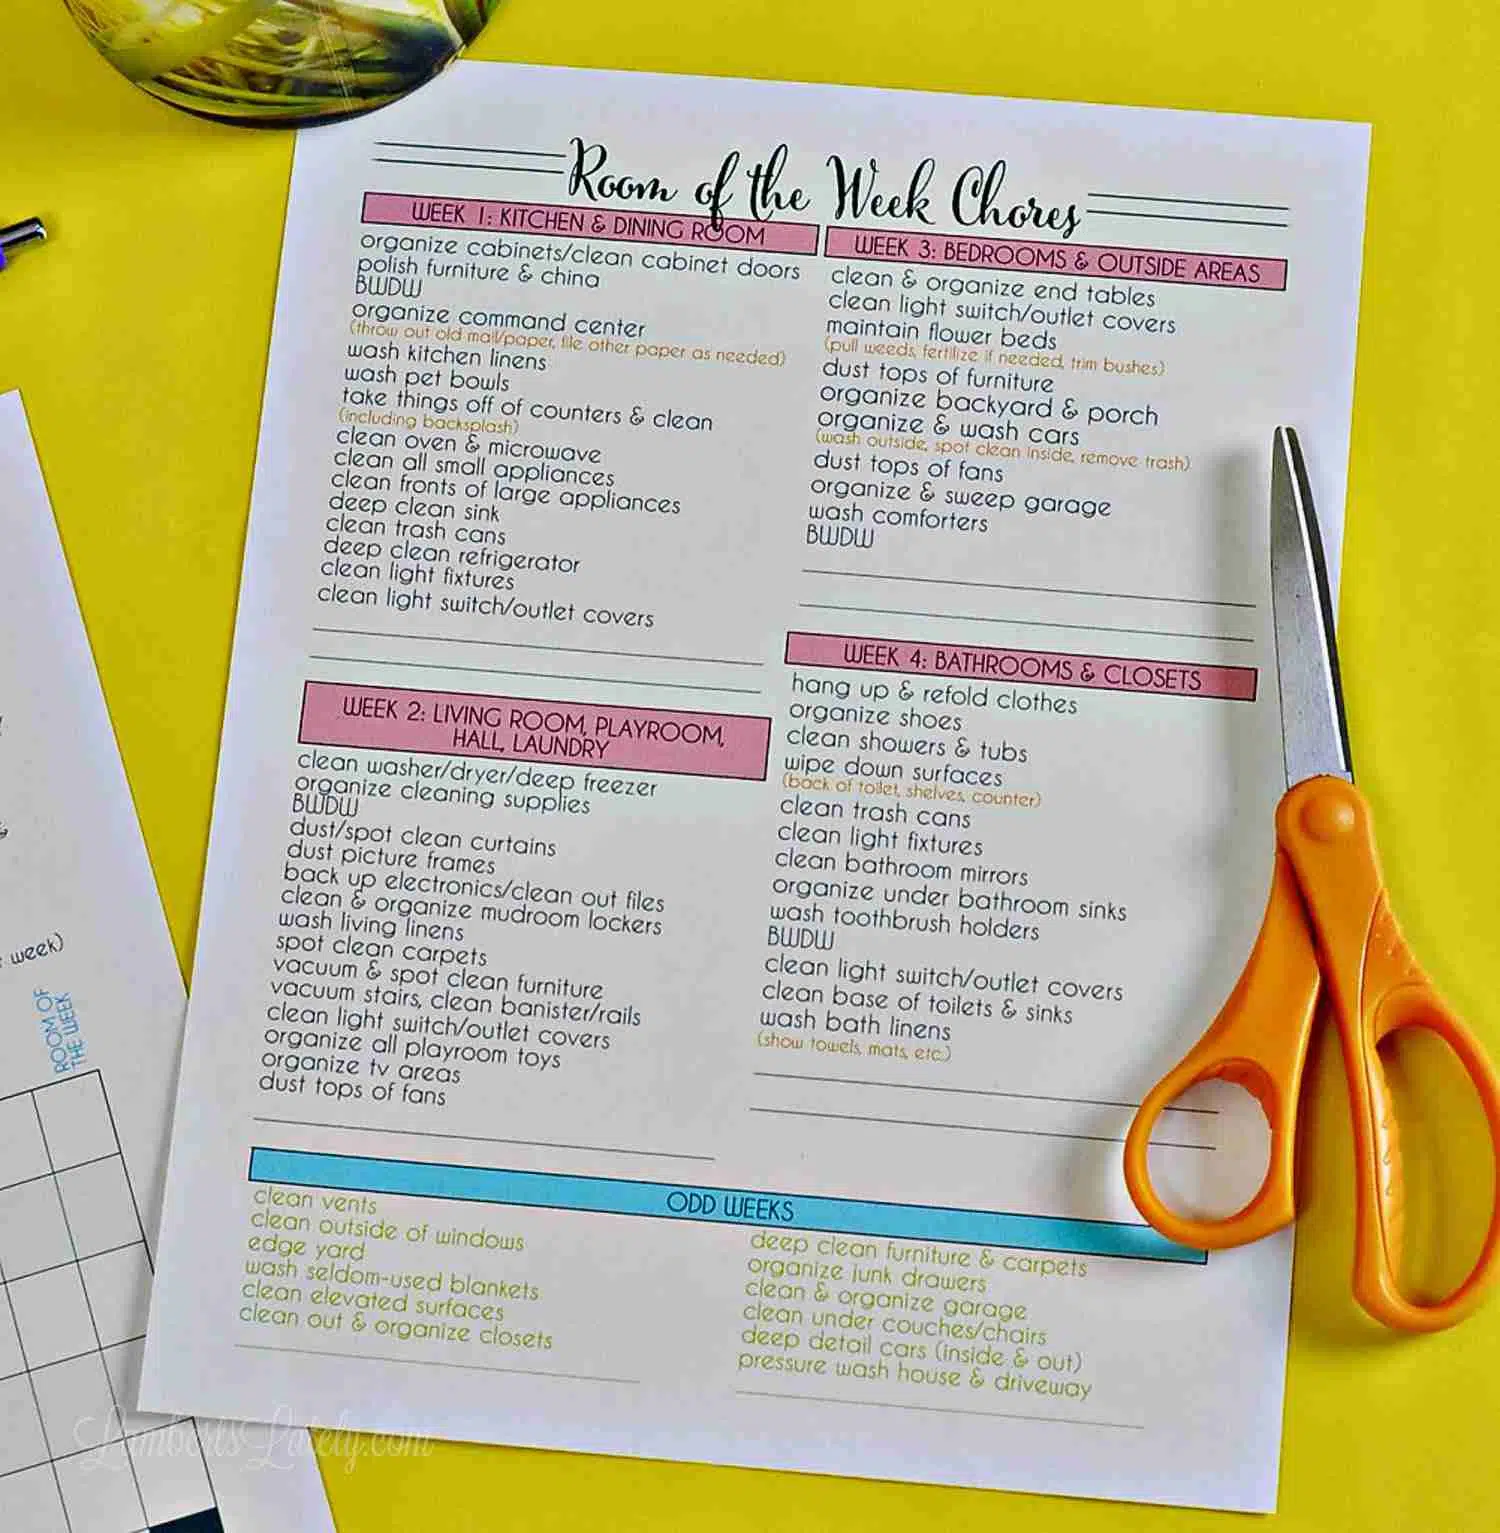 room of the week cleaning checklist on a yellow background with a pair of scissors.